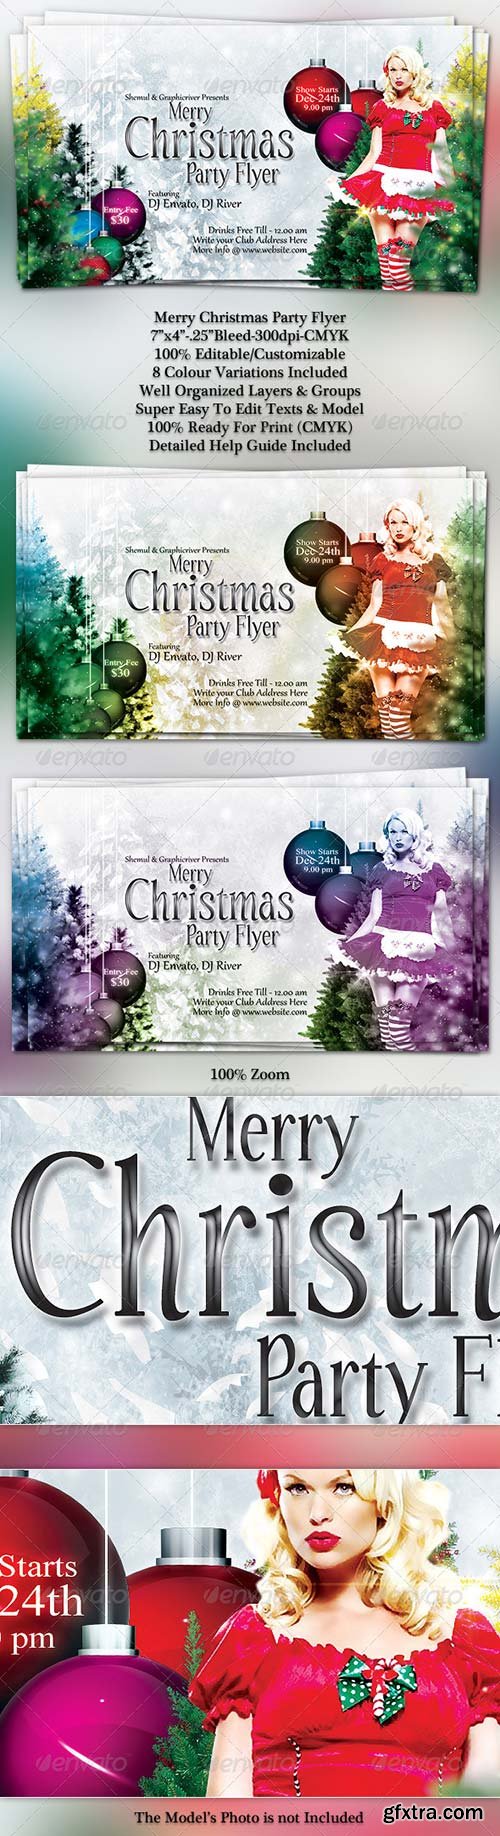 GraphicRiver - Merry Christmas Party Flyer 866902